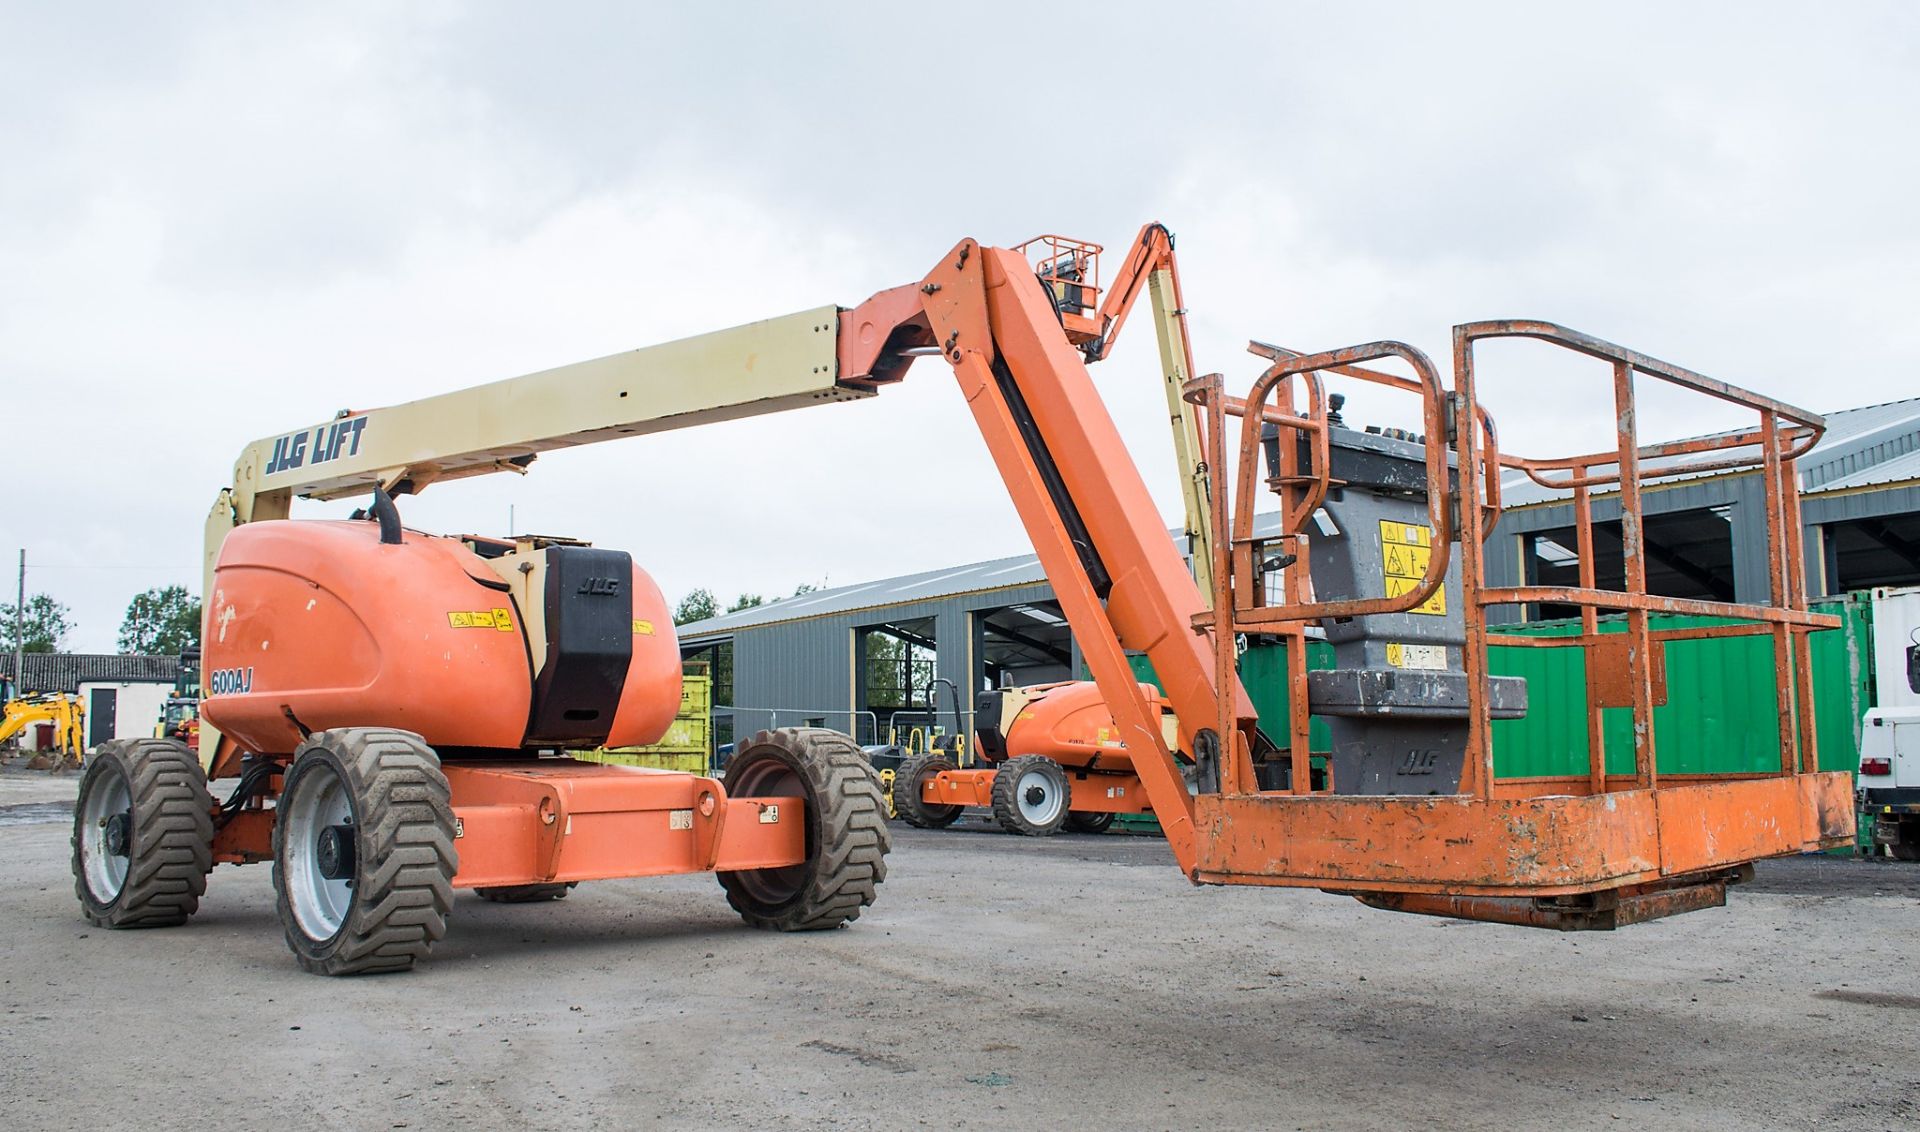 JLG 600AJ diesel driven 4WD articulated boom access platform Year: 2007 S/N: 23275 Recorded Hours: - Image 2 of 17